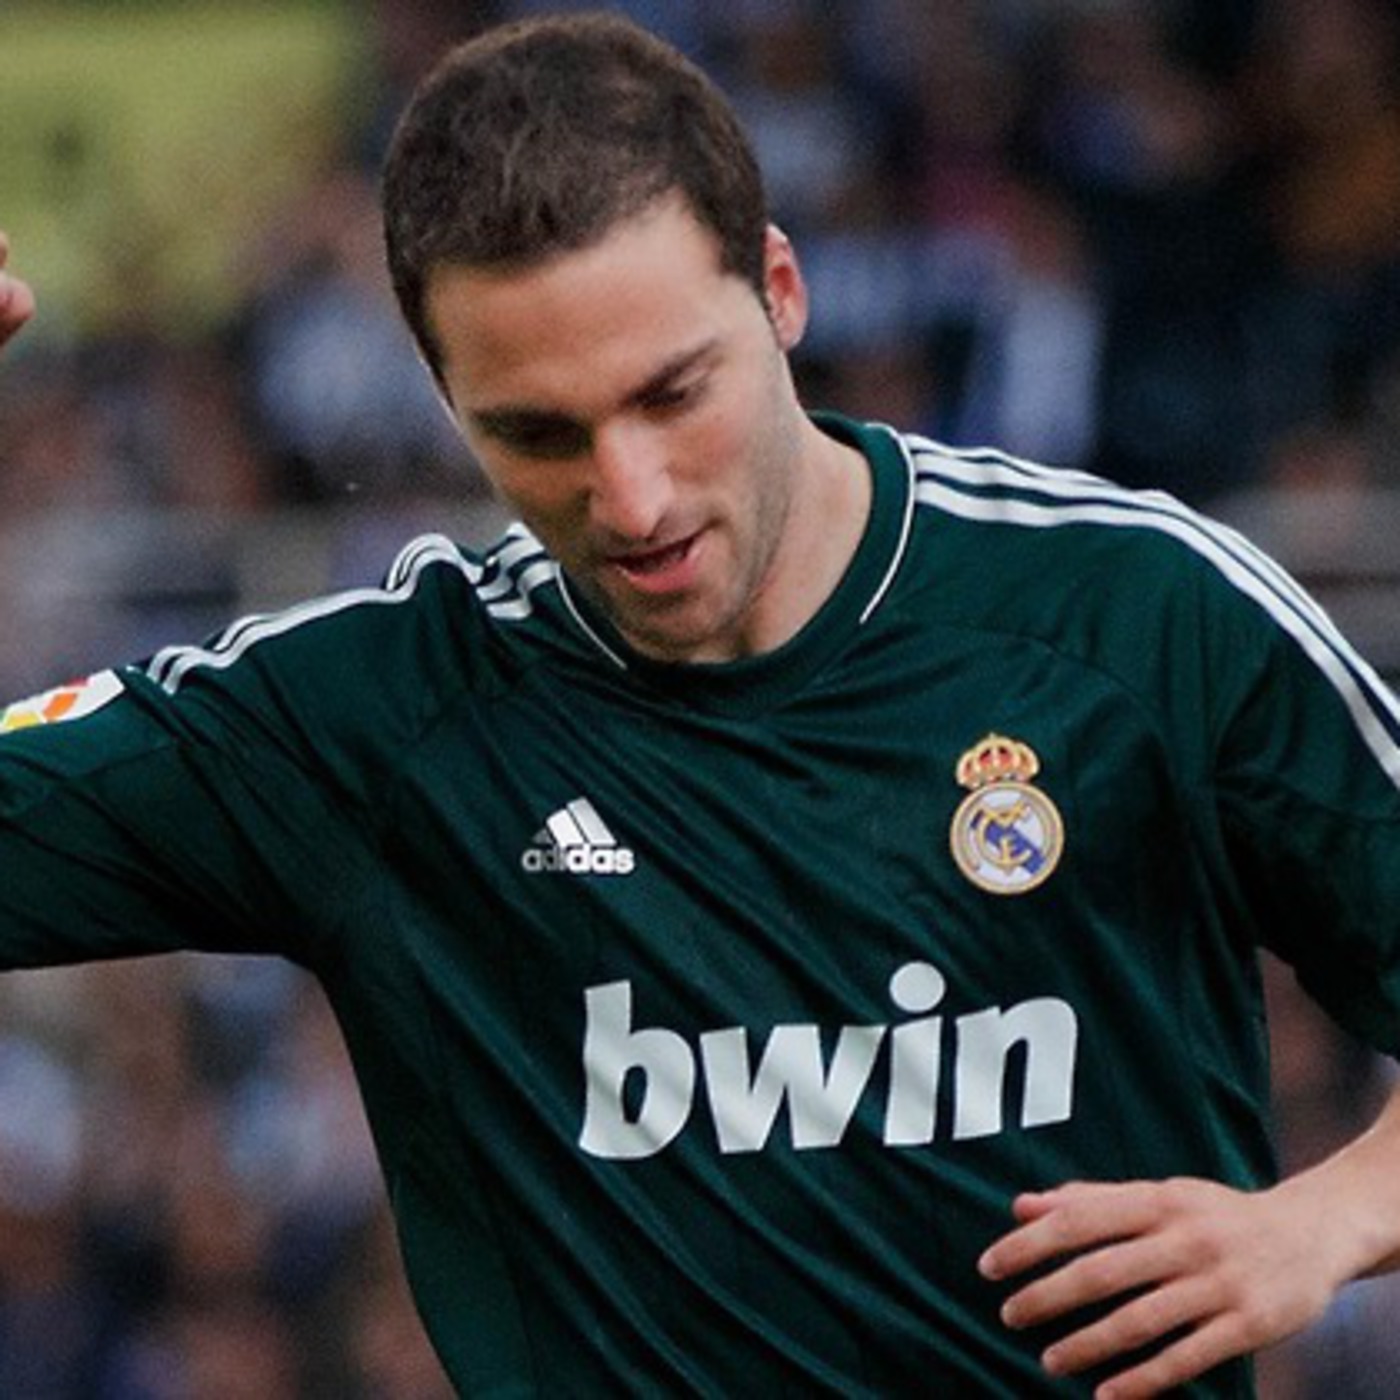 ISF Tonight: Higuain to Arsenal, Spain reach Confederations Cup final, Jordi Amat joins Swansea and more.